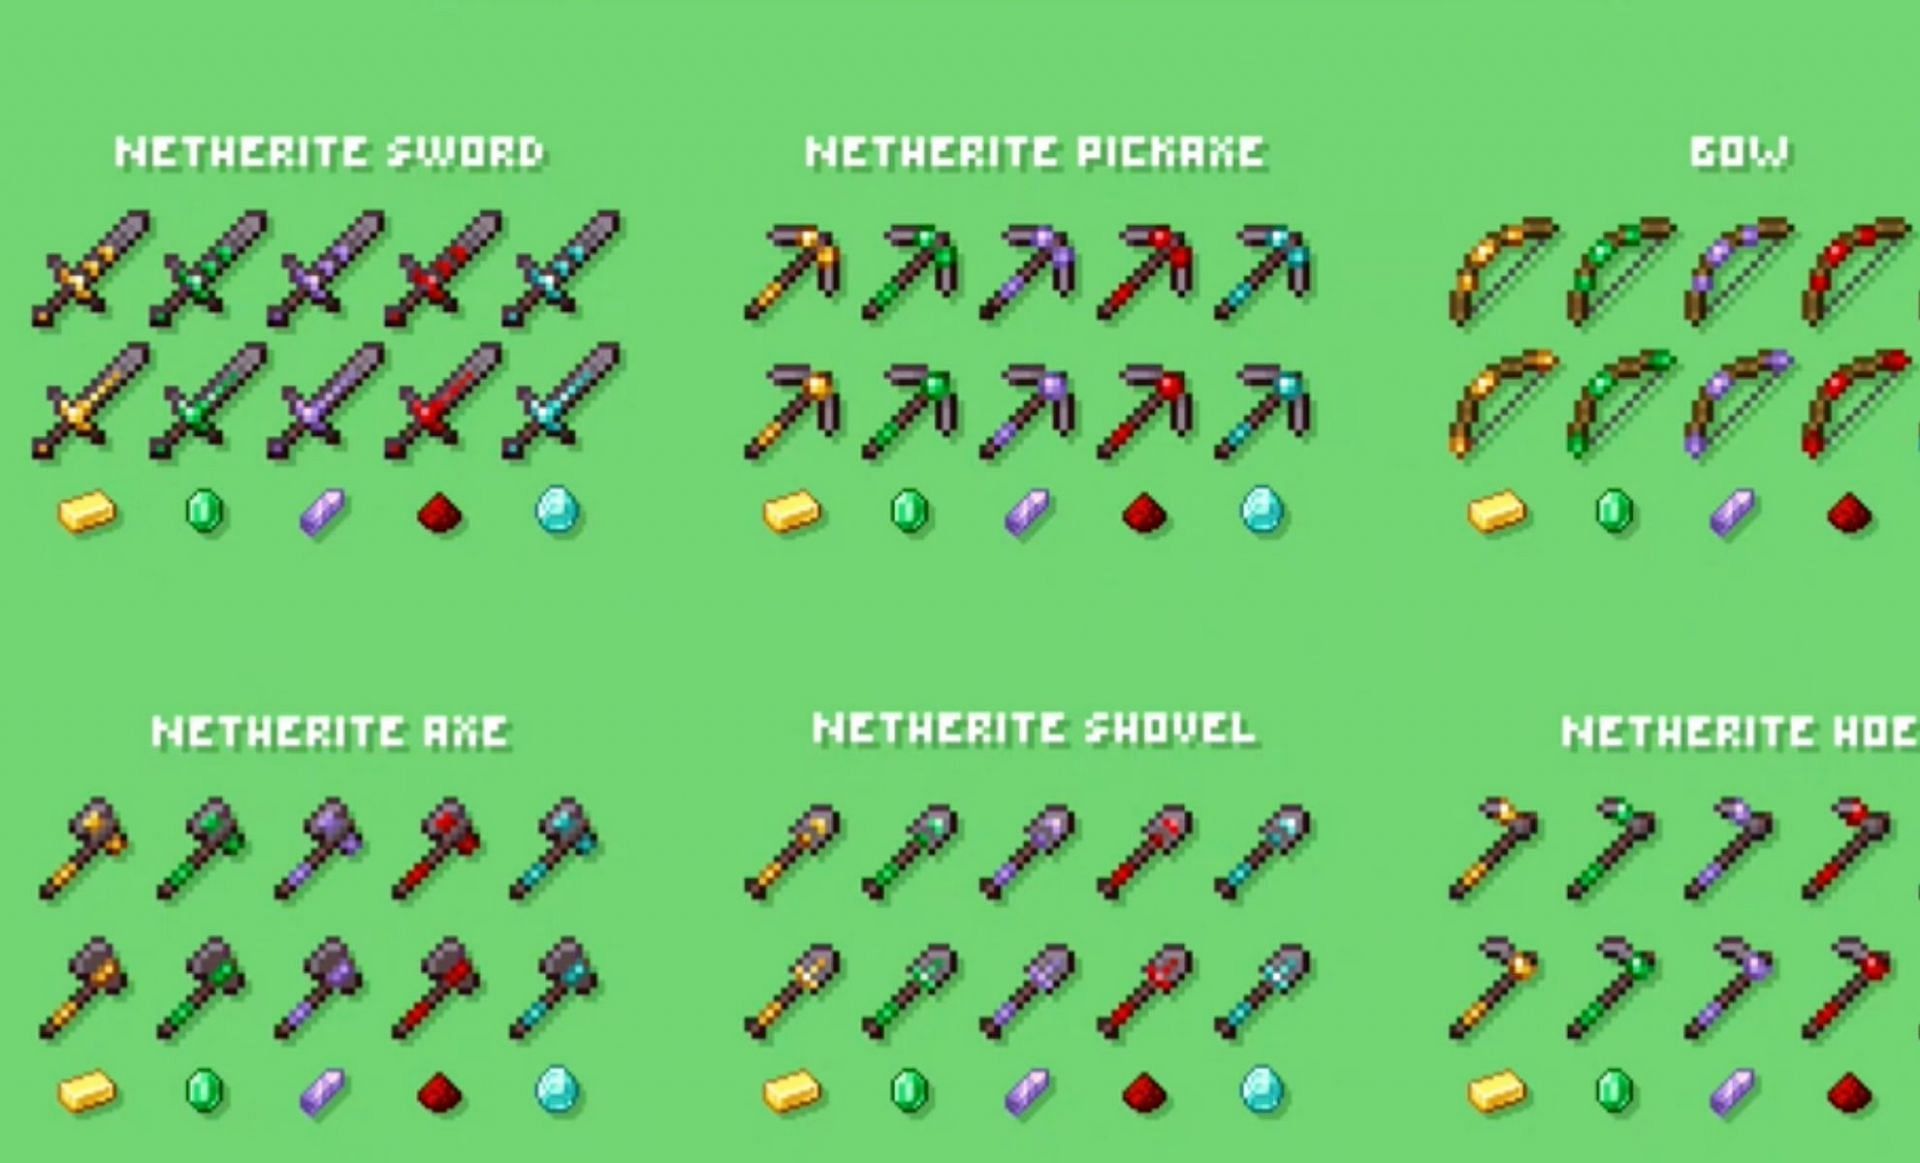 New weapon and tool trims from a data pack (Image via u/JoeFly2009 on Reddit)